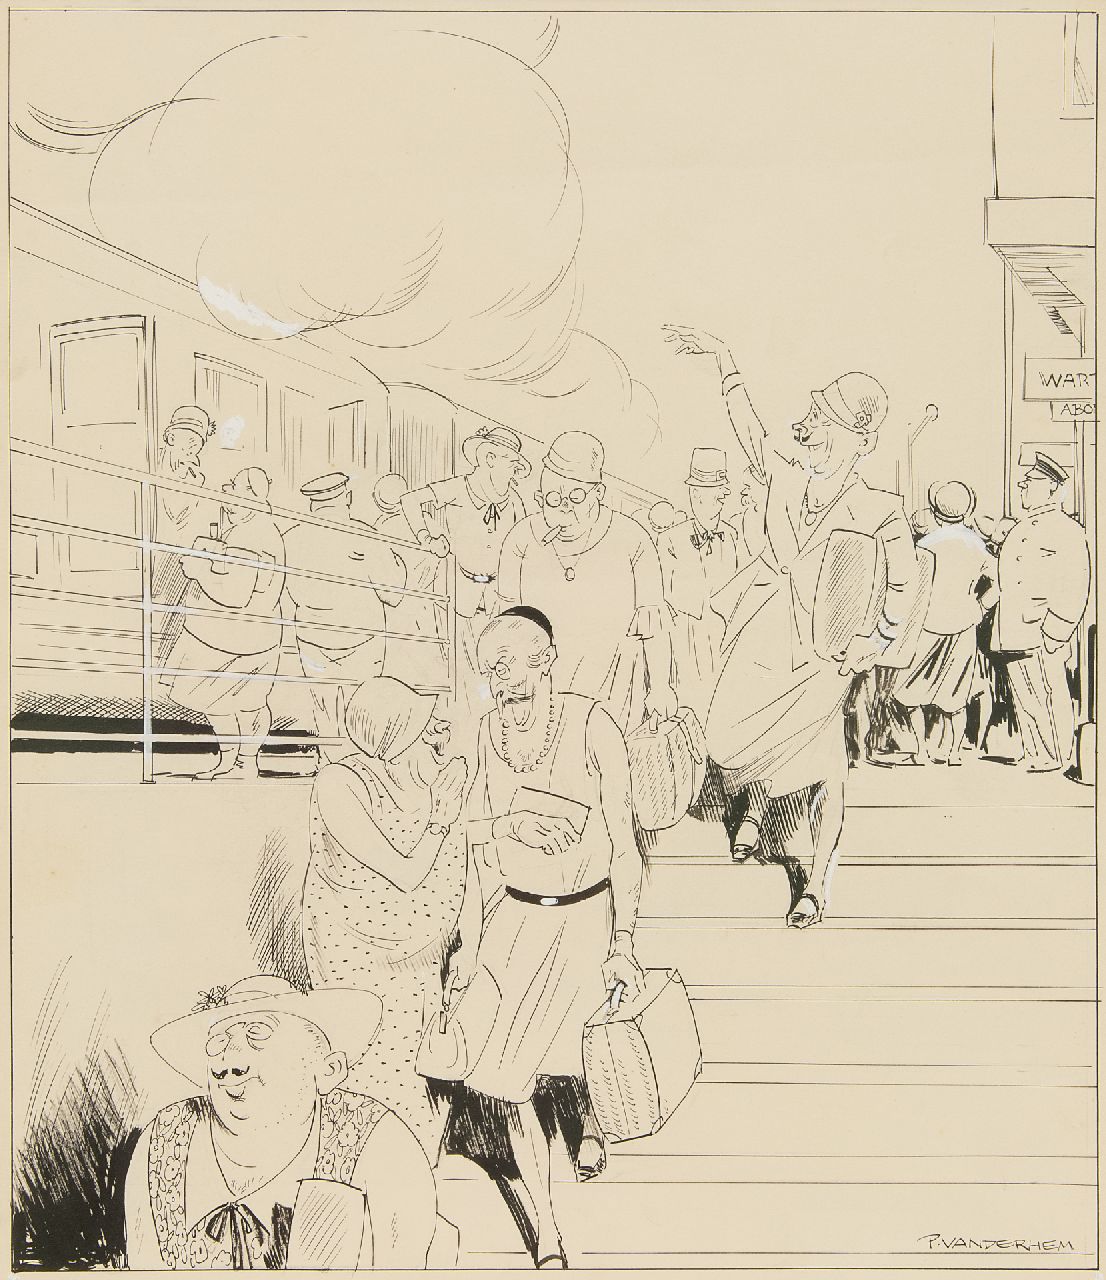 Piet van der Hem | Summer crowds at the station, ink and watercolour on paper, 49.8 x 35.0 cm, signed l.r.